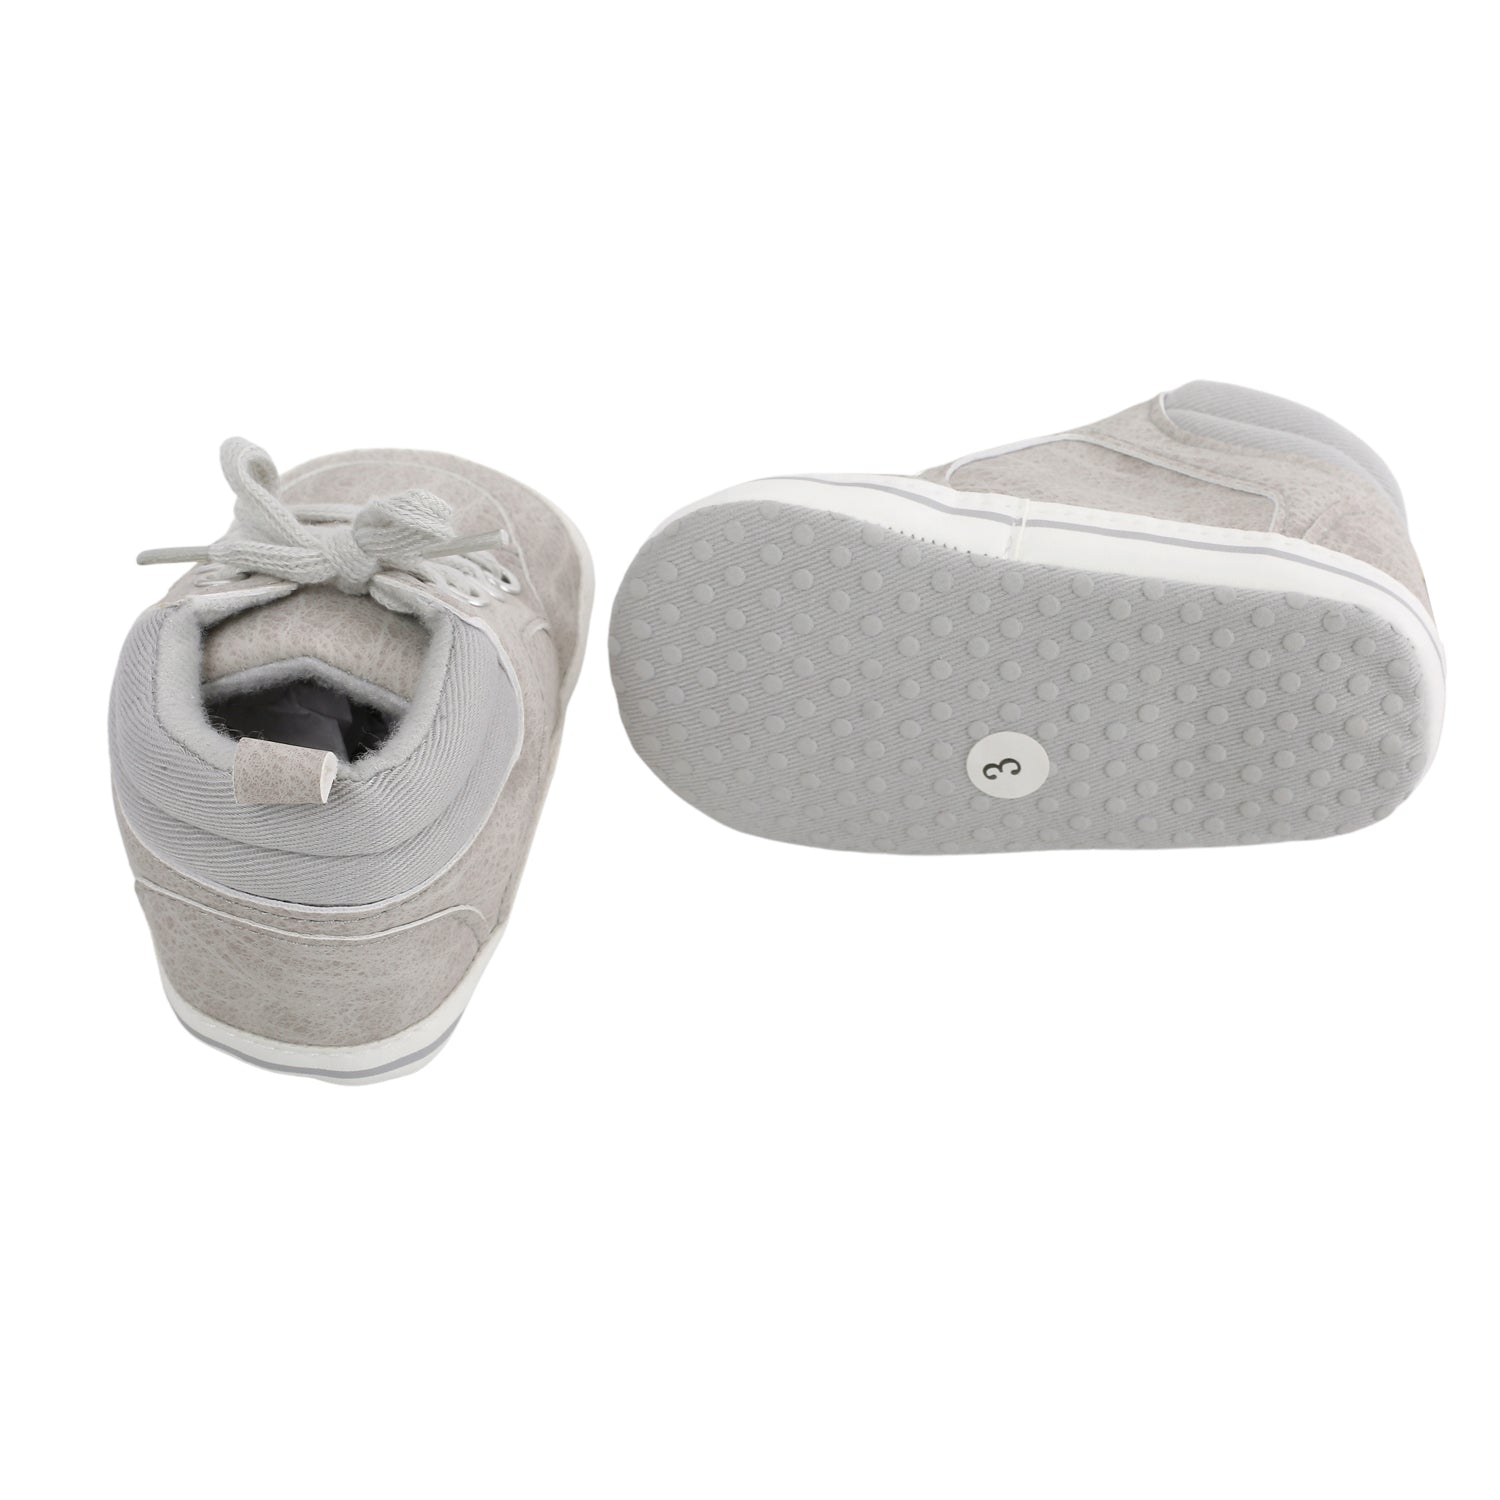 Baby Moo Textured Grey Lace Up Sneakers - Baby Moo